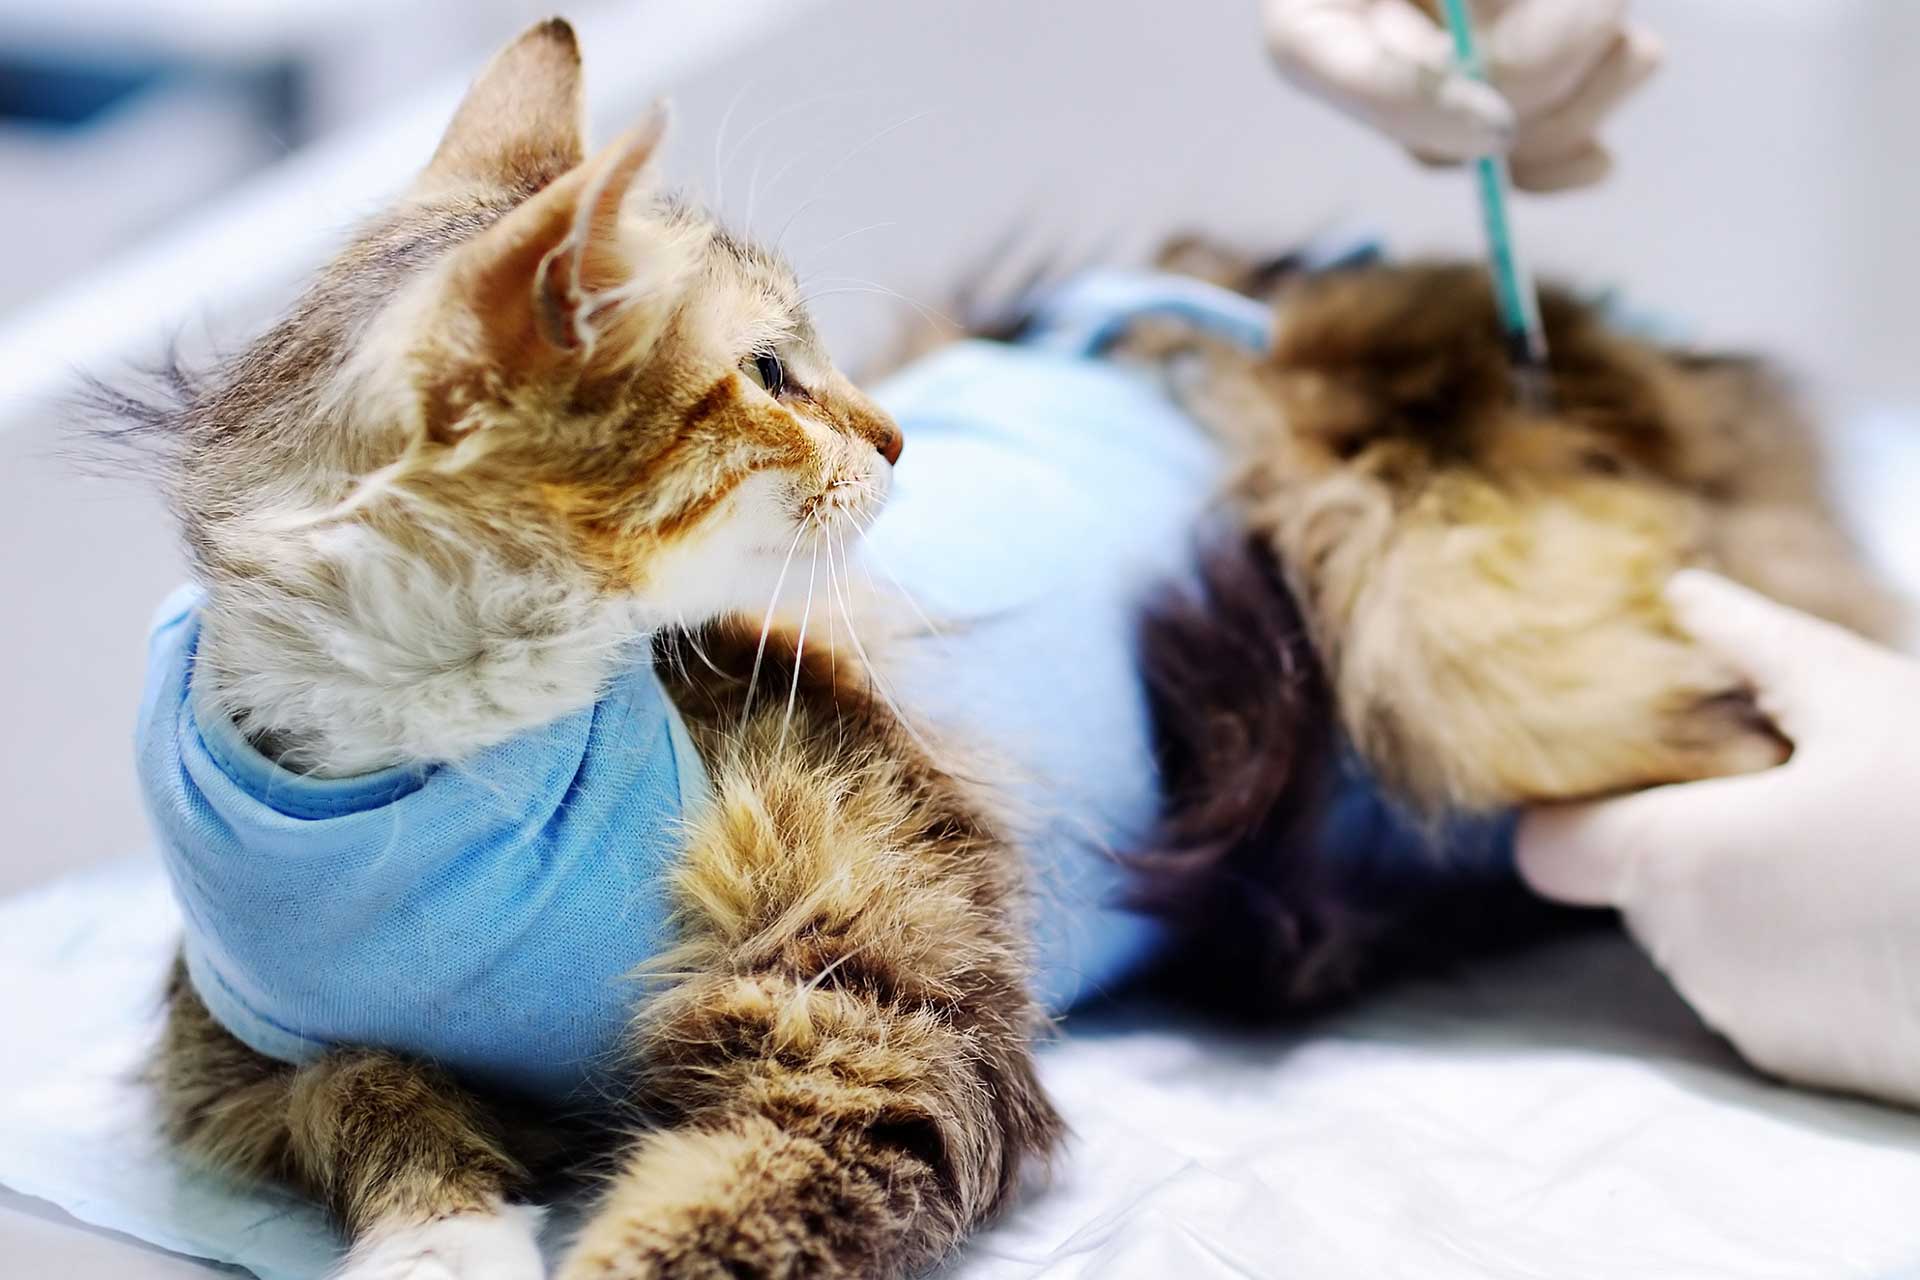 Cat with a bandage getting treatment